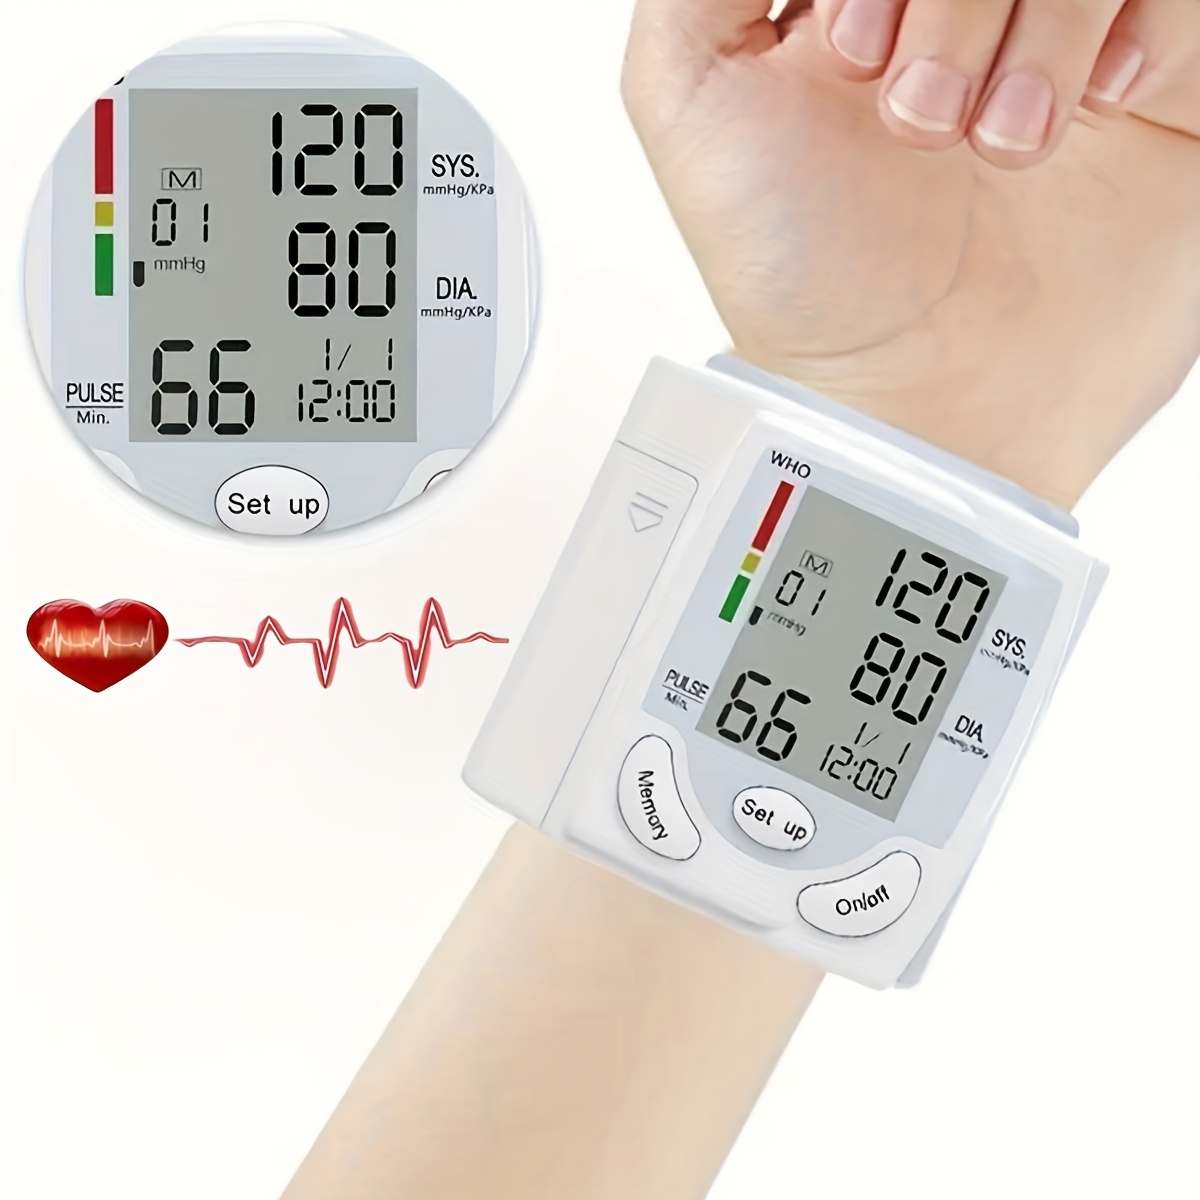  potulas Blood Pressure Monitor, Wrist Blood Pressure Cuff  Monitor with USB Charging, Automatic Digital BP Machine,Voice Broadcast,  Large Display Screen : Health & Household